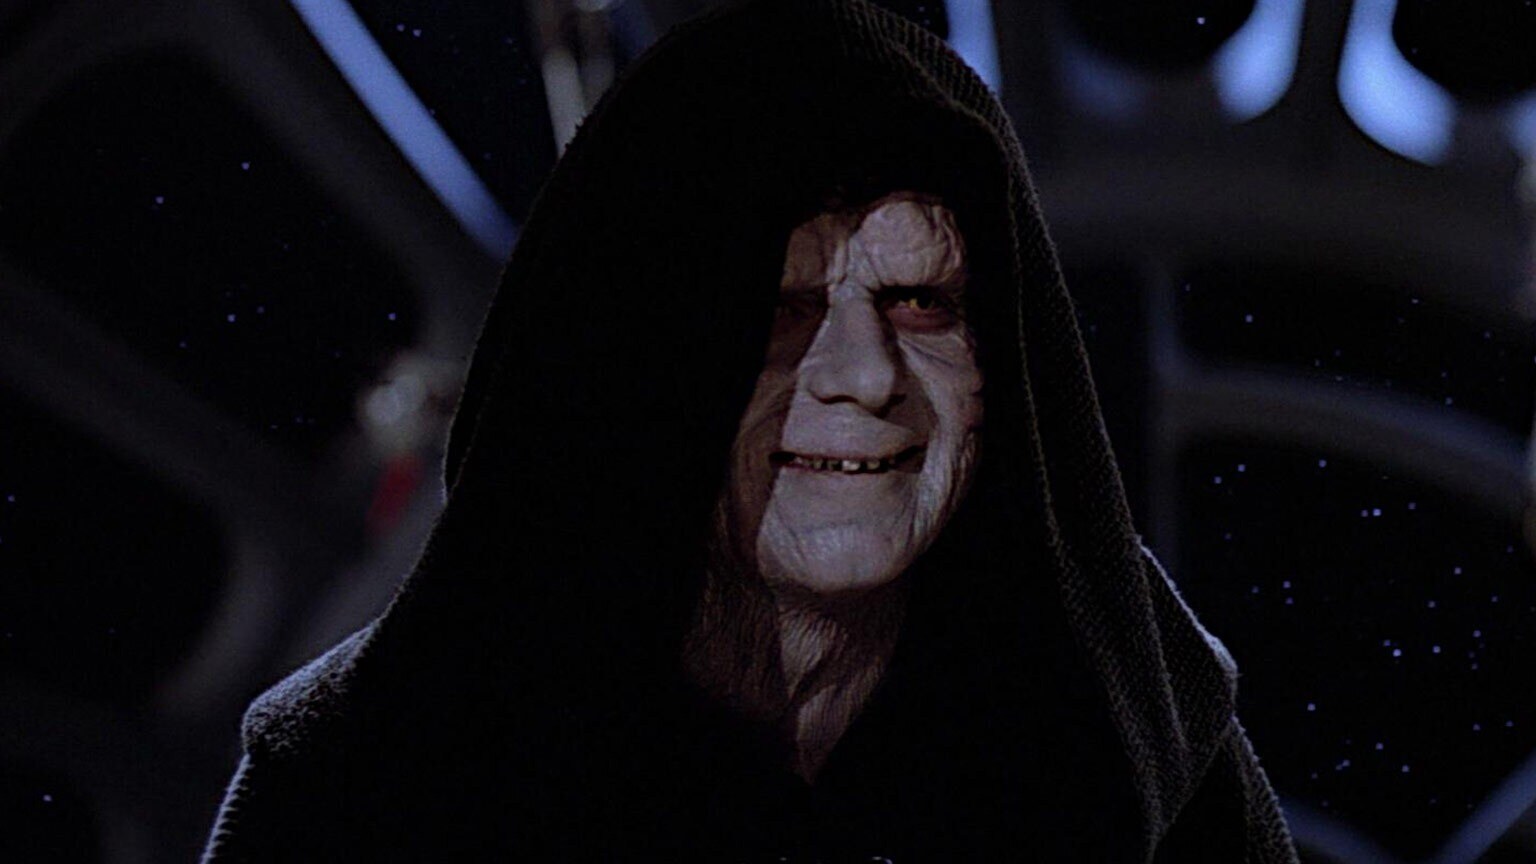 7 Terrifying Star Wars Tracks for Your Halloween Playlist